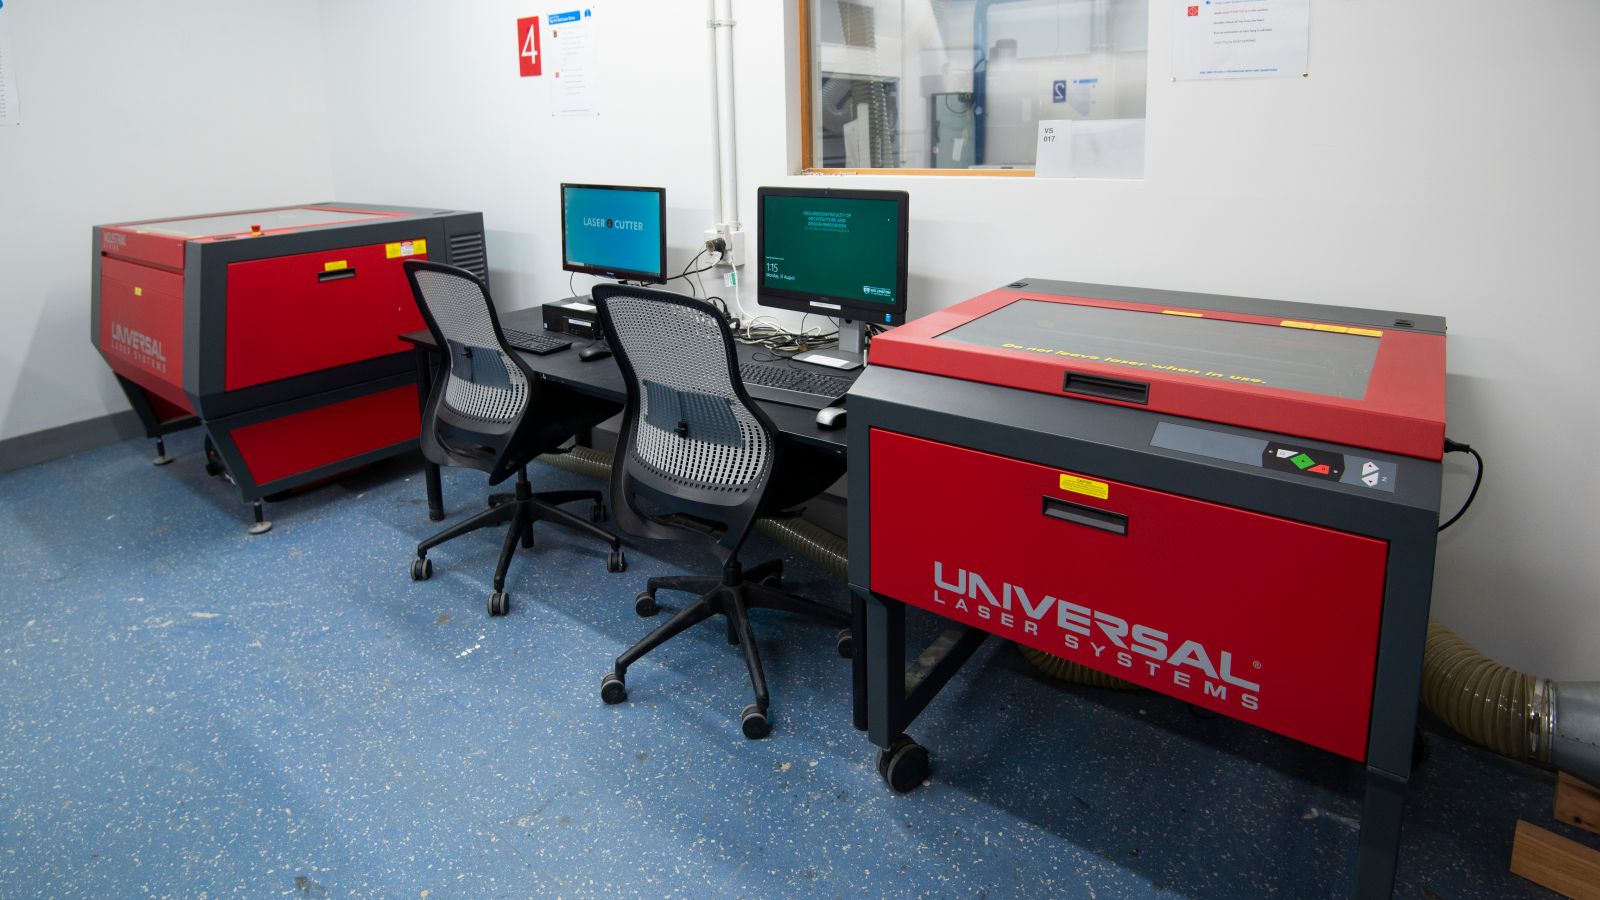 Wellington Faculty of Architecture and Design Innovation's ULS laser cutters